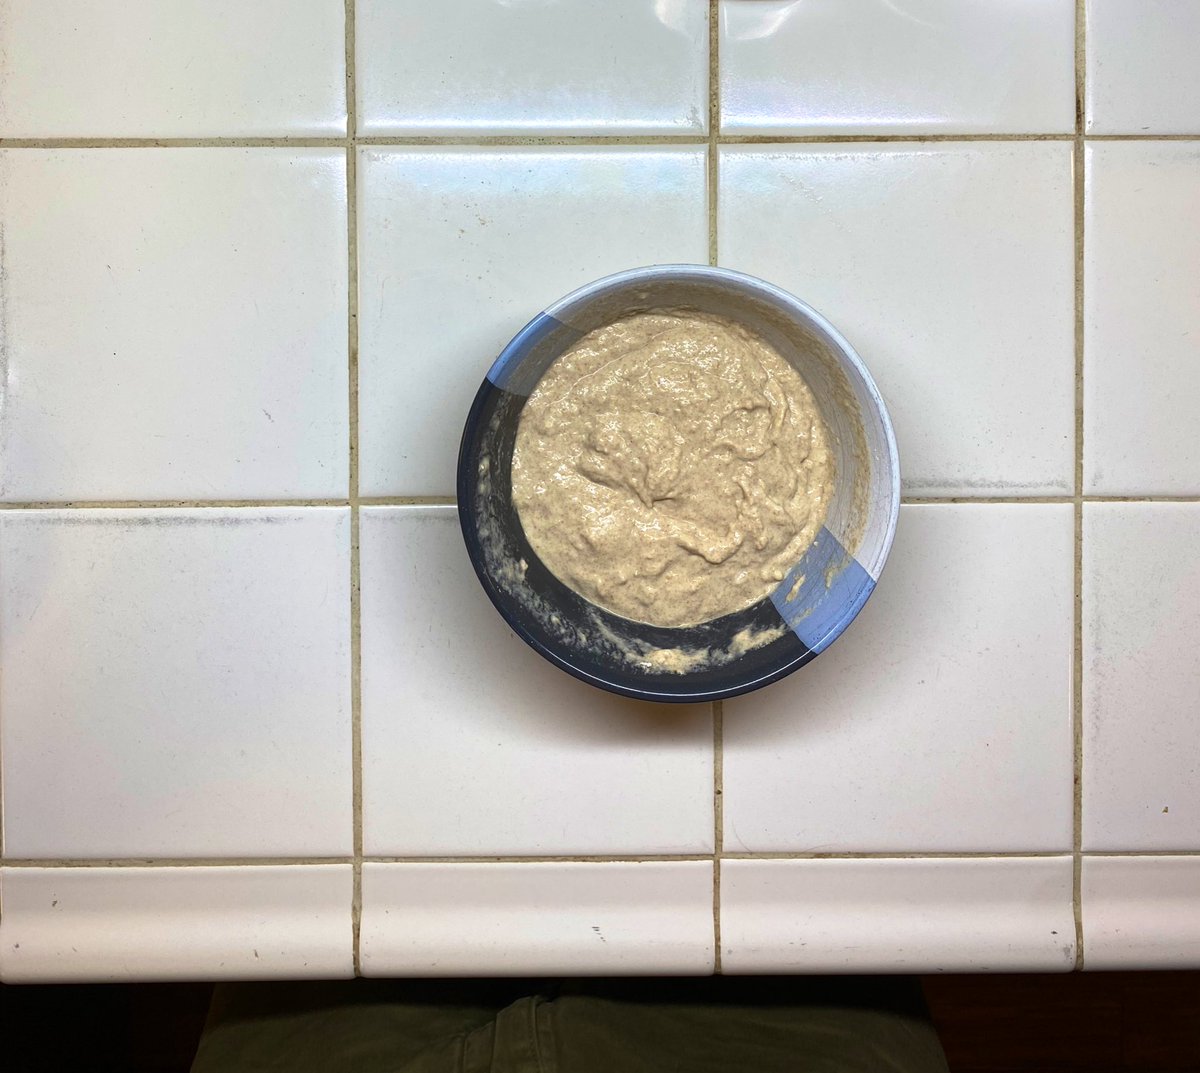 Add some water, stir and adjust until it has the consistency of a nice tile grout. If you’re not into tile installation, make it like a nice cottage cheese. If you don’t know what that is, I mean, who doesn’t know what cottage cheese is like. Come on.